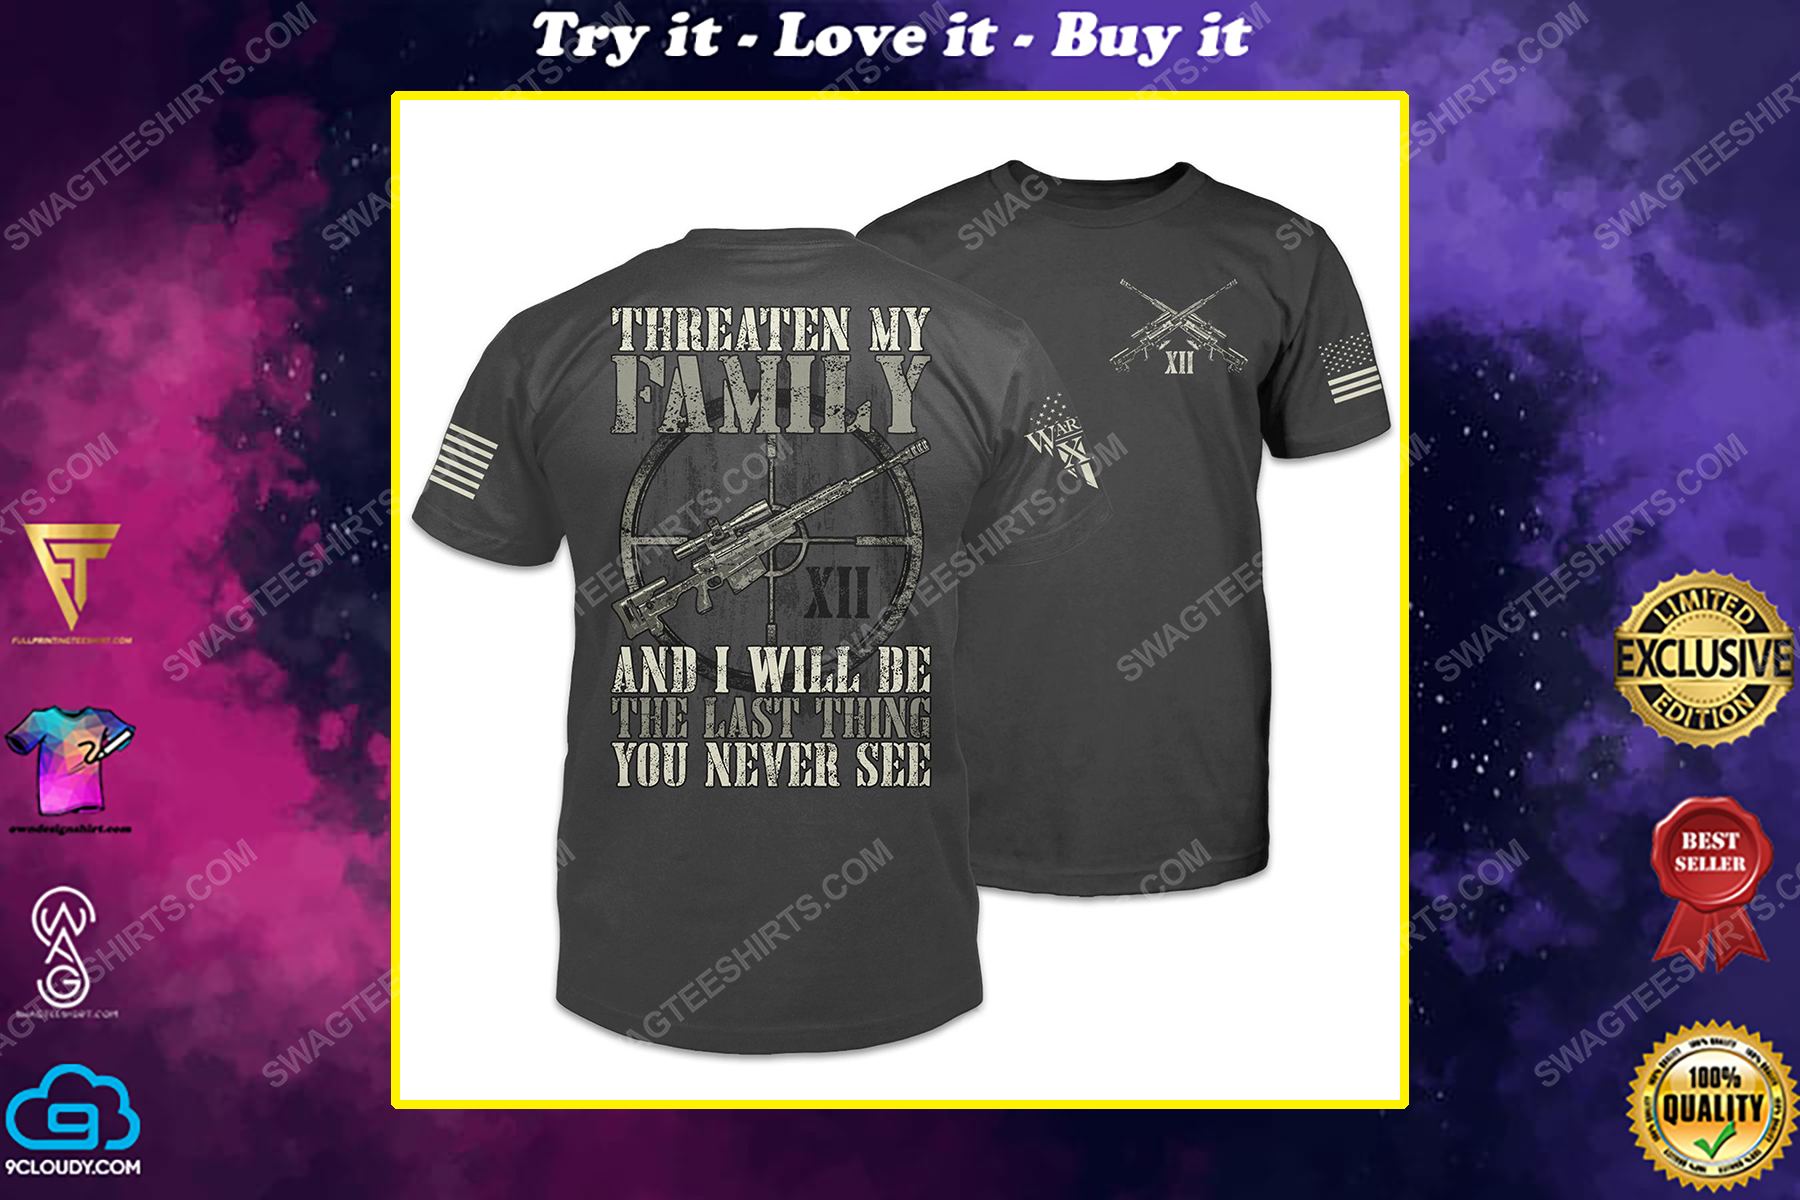 Threaten my family amd i will be the last thing you never see shirt